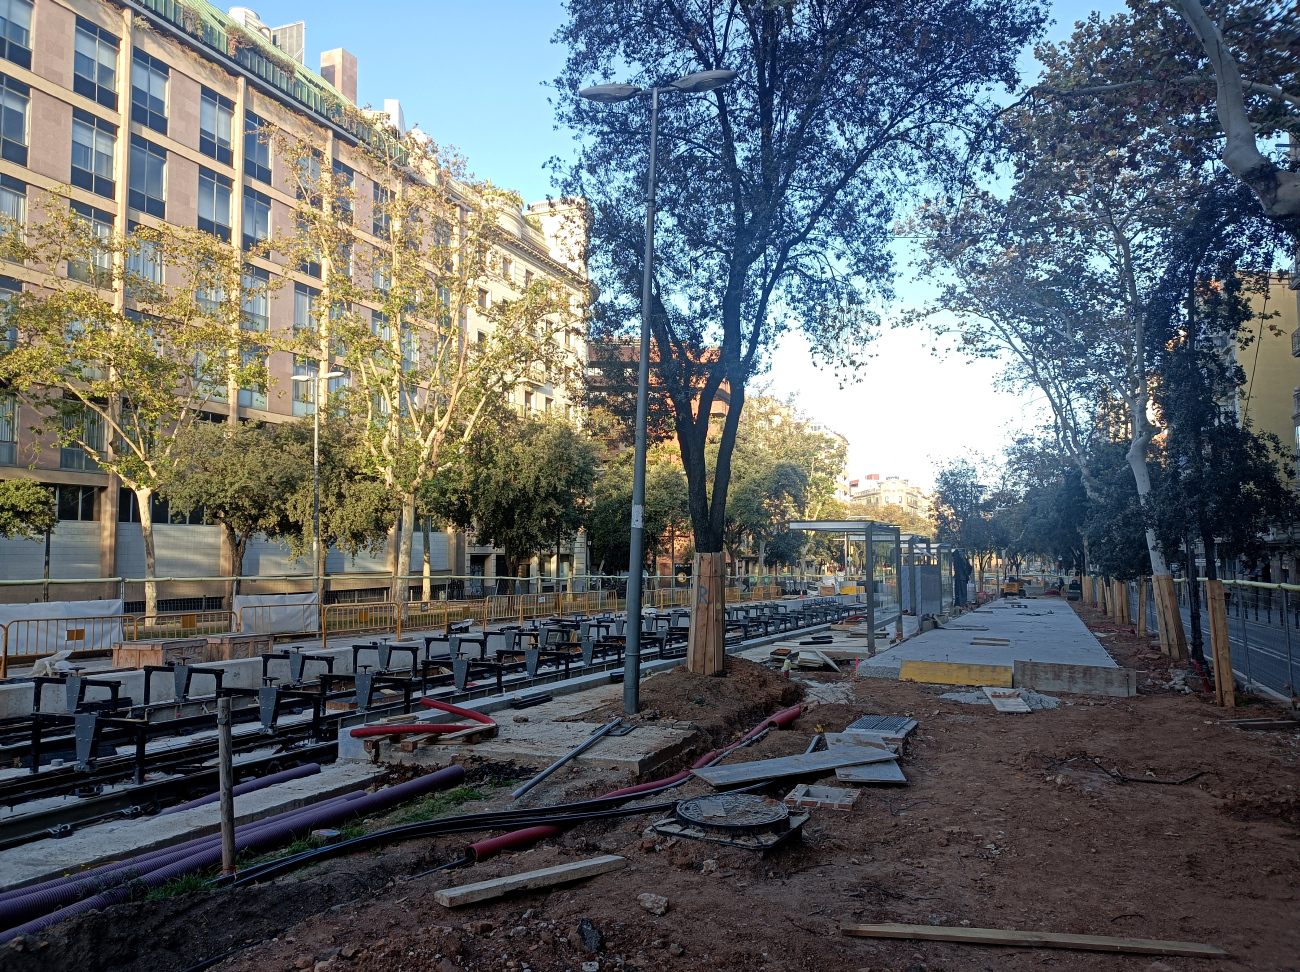 Barcelona — Construction of the connection between the two tram lines on Diagonal